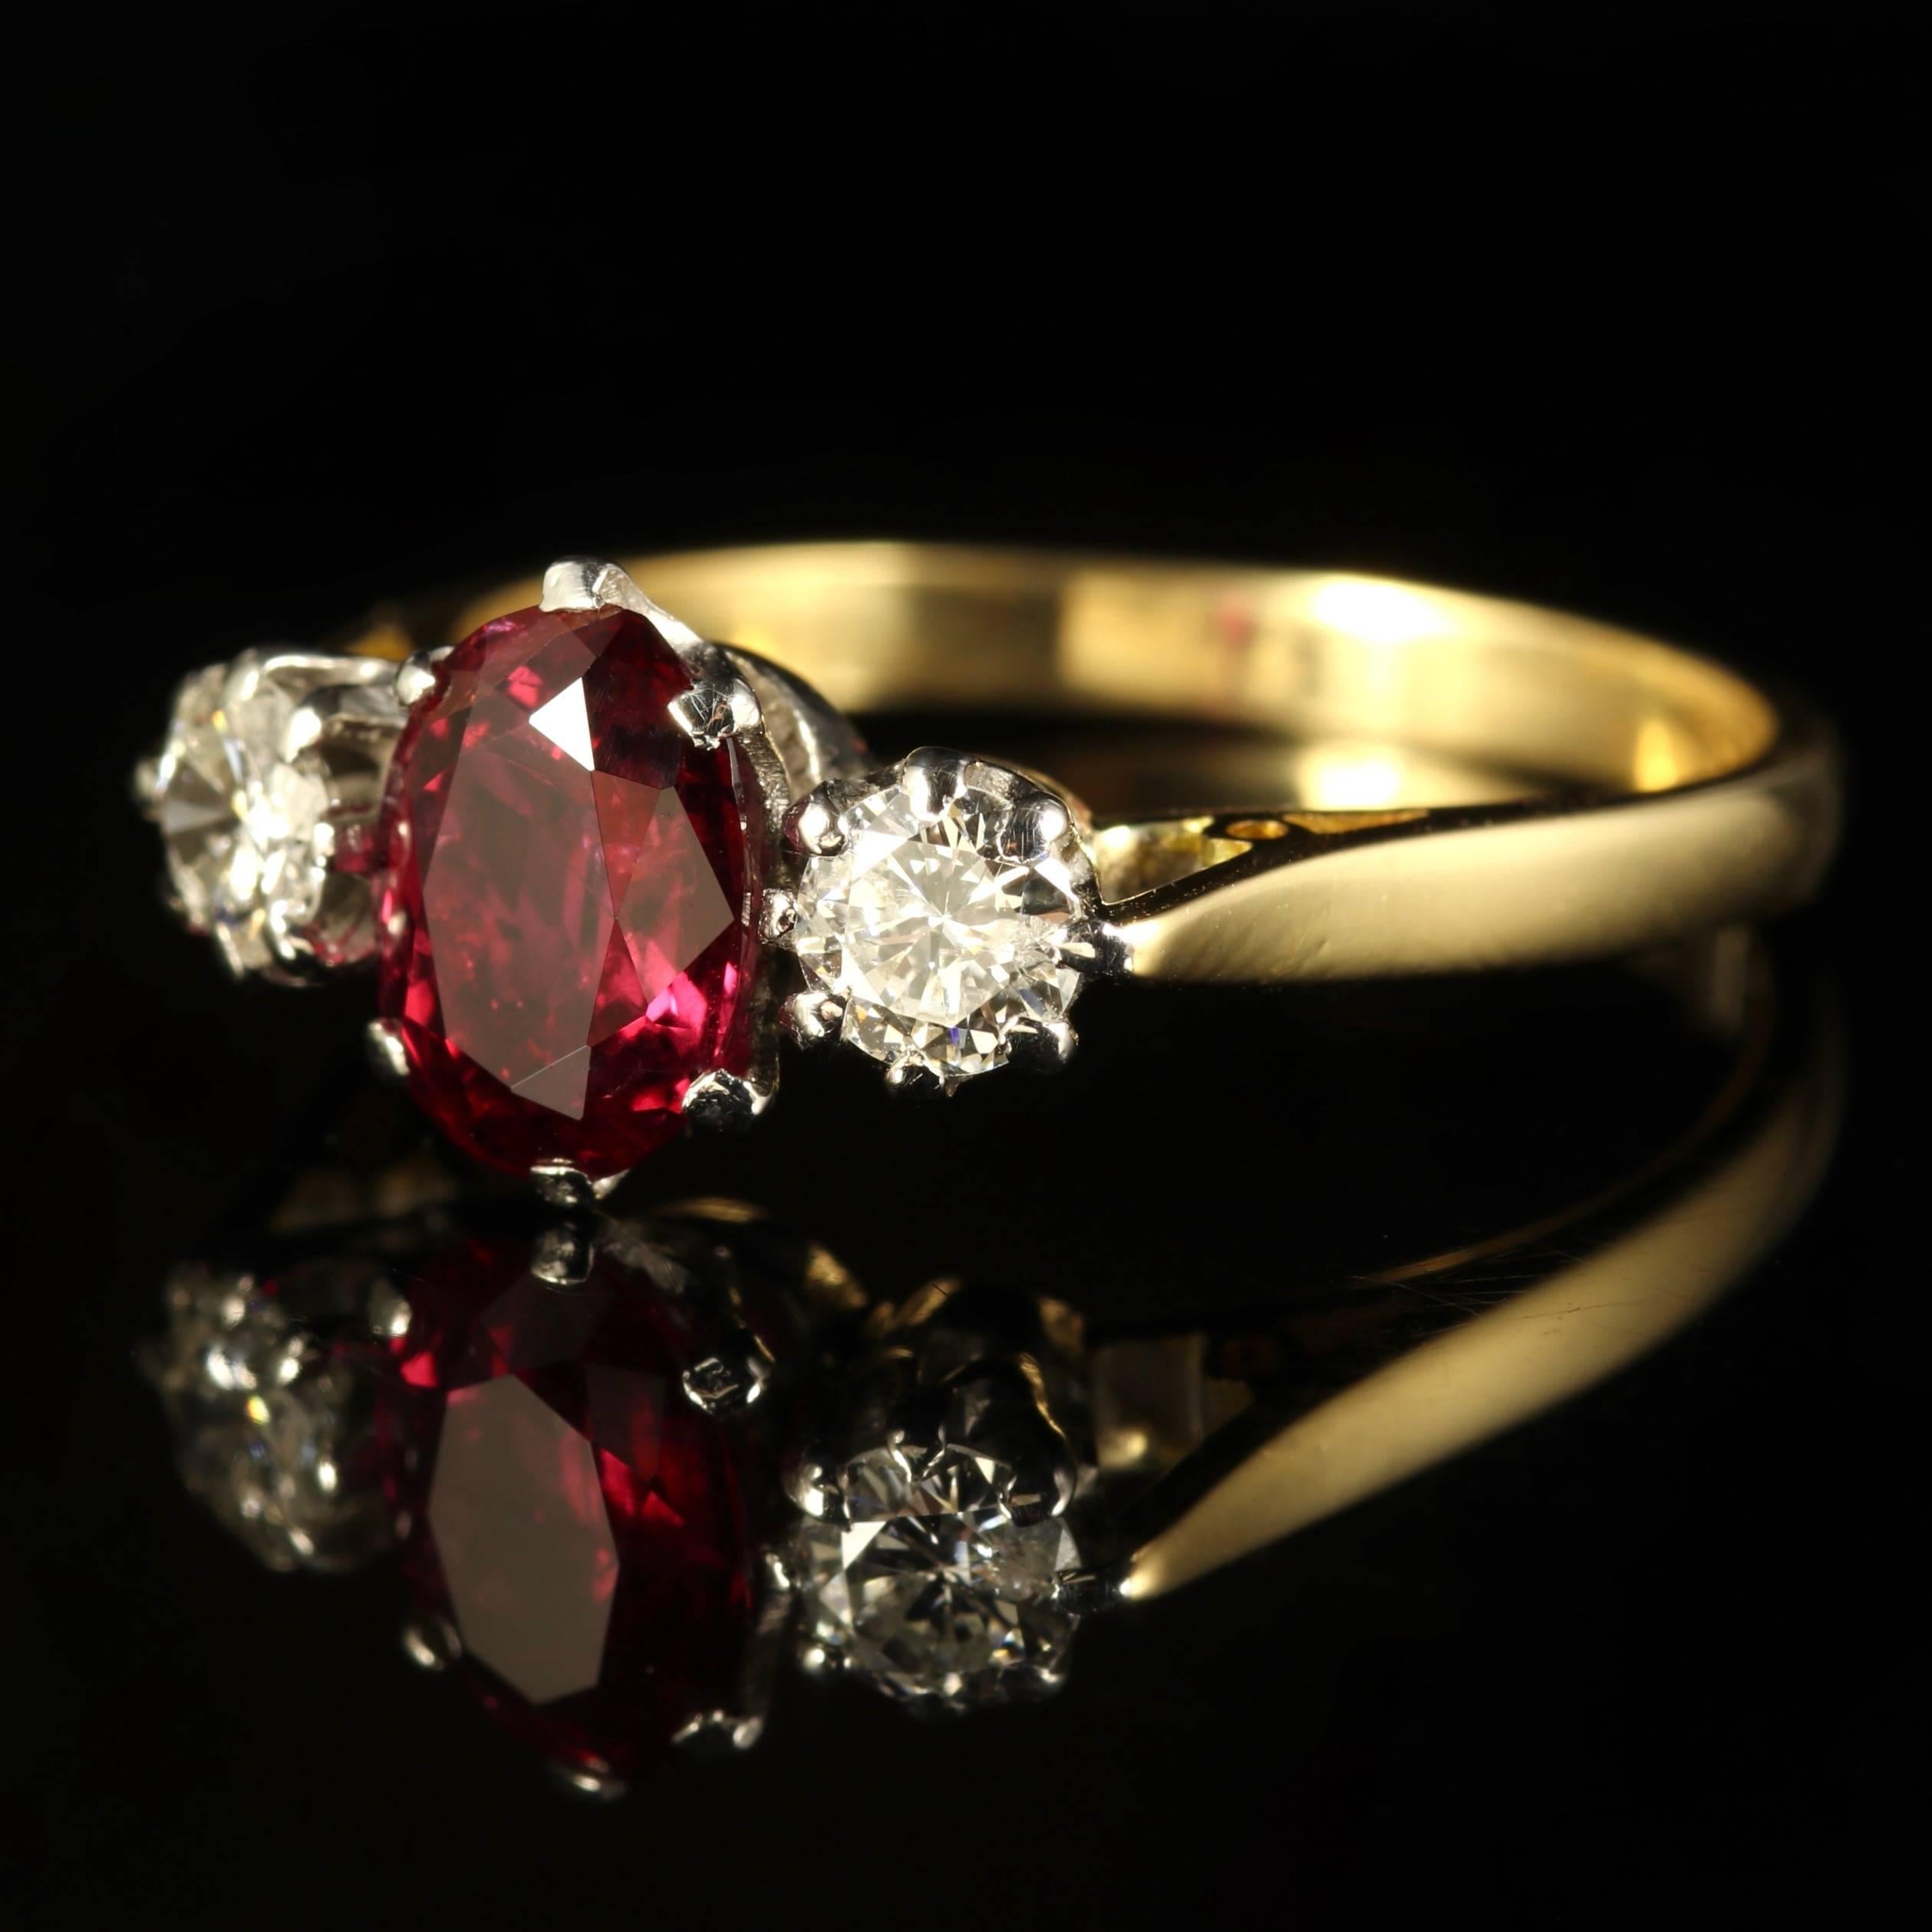 This fabulous 18ct Yellow Gold ring is set with a lovely rich, Ruby which measures 1.50ct.

Two old cut Diamonds are flanked either side of the Ruby which are both 0.20ct.

The Diamonds are superb cut, colour and clarity - SI1/2 H colour.

The Ruby